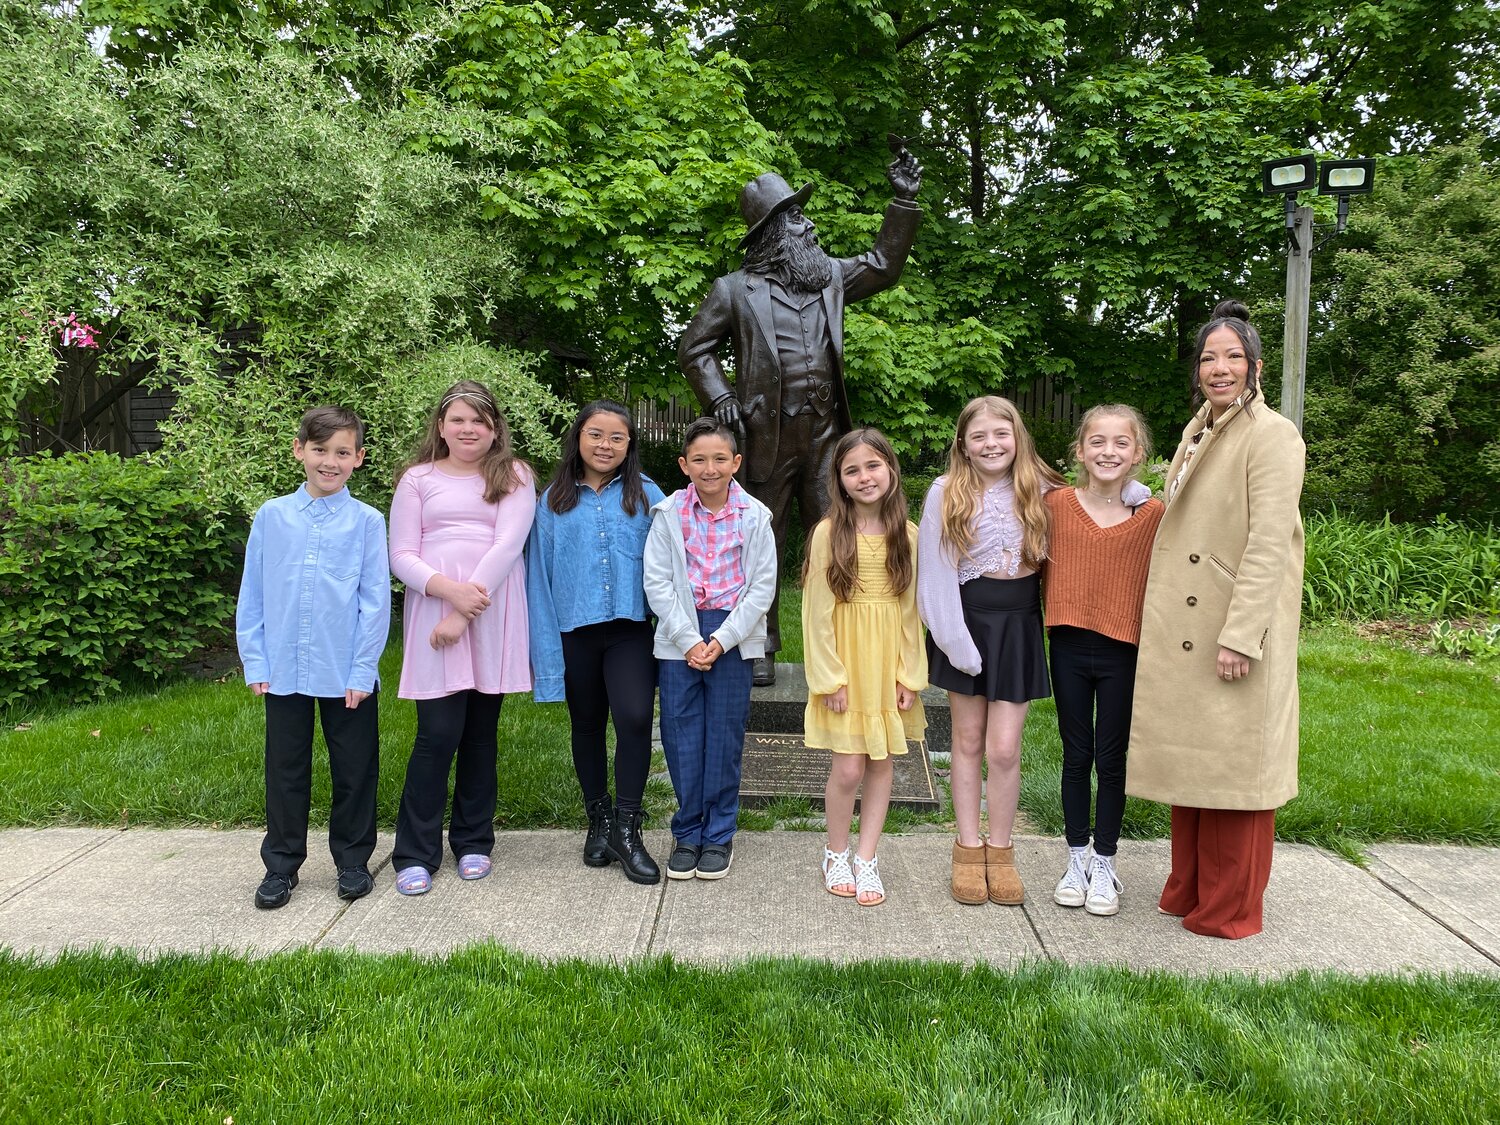 Members of the Birch Pages Writing Club in front of a statue of Walt Whitman. The club earned first place at the annual student poetry contest held by the Walt Whitman Birthplace Association.